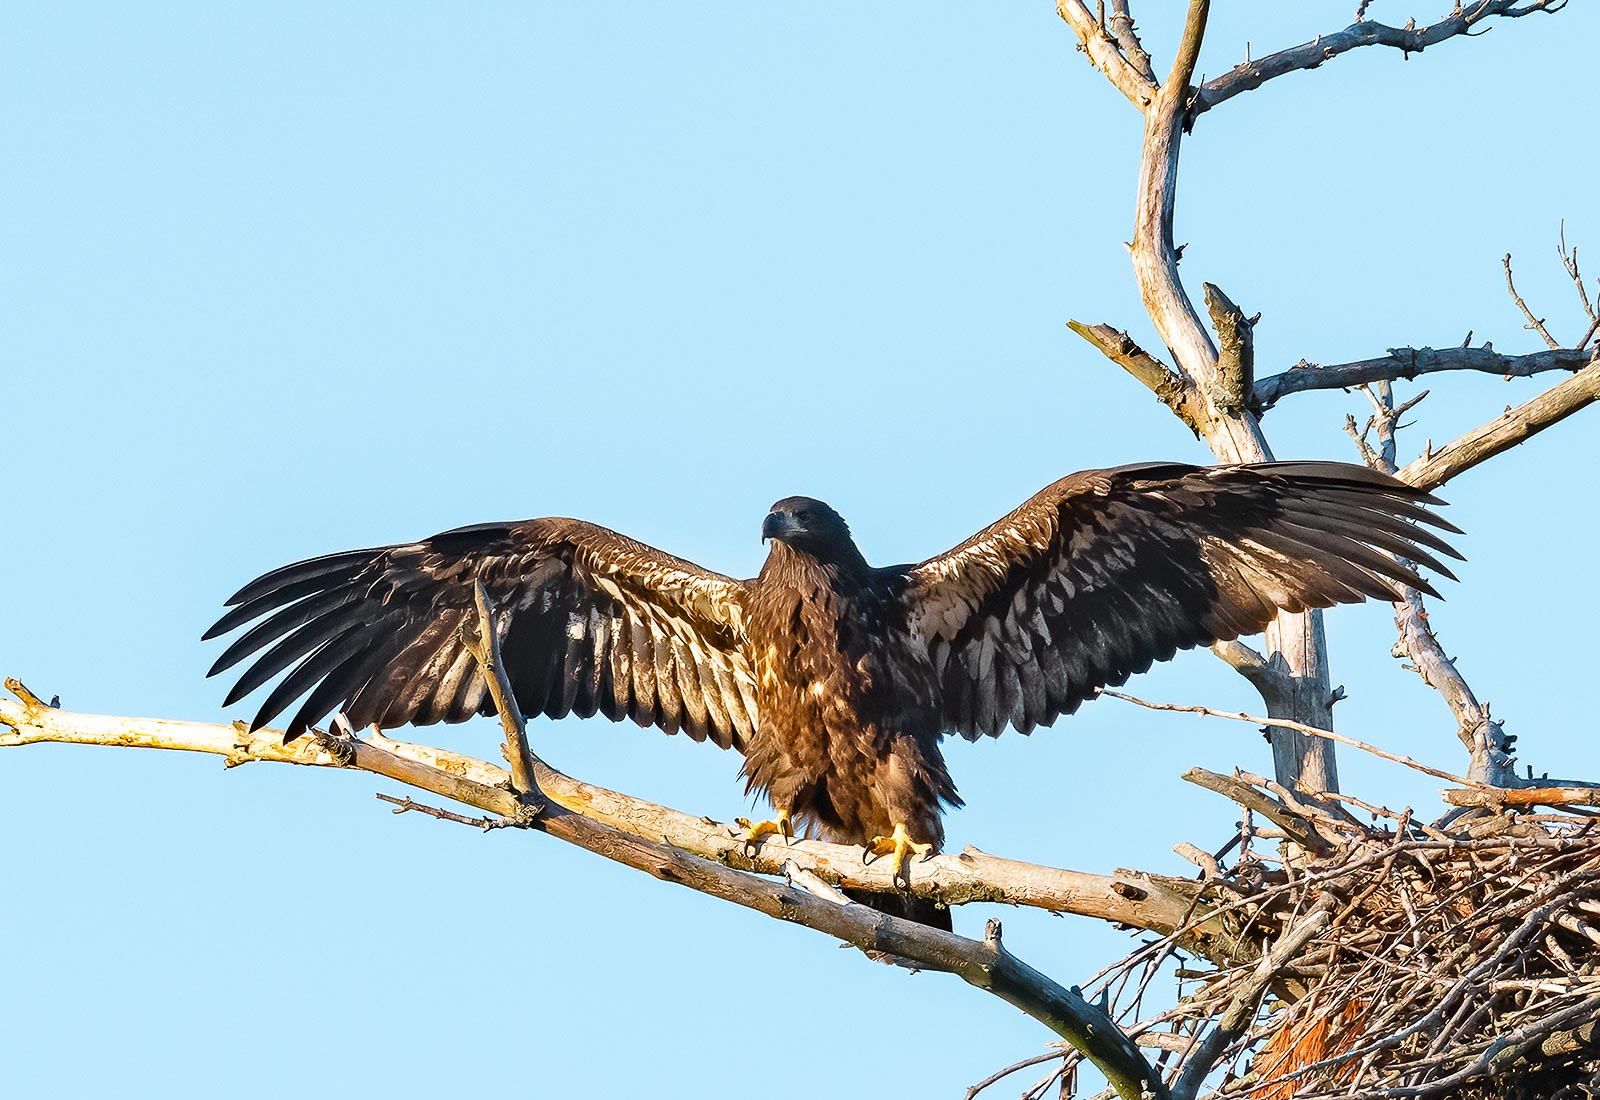 Eaglet branching and preparing for flight